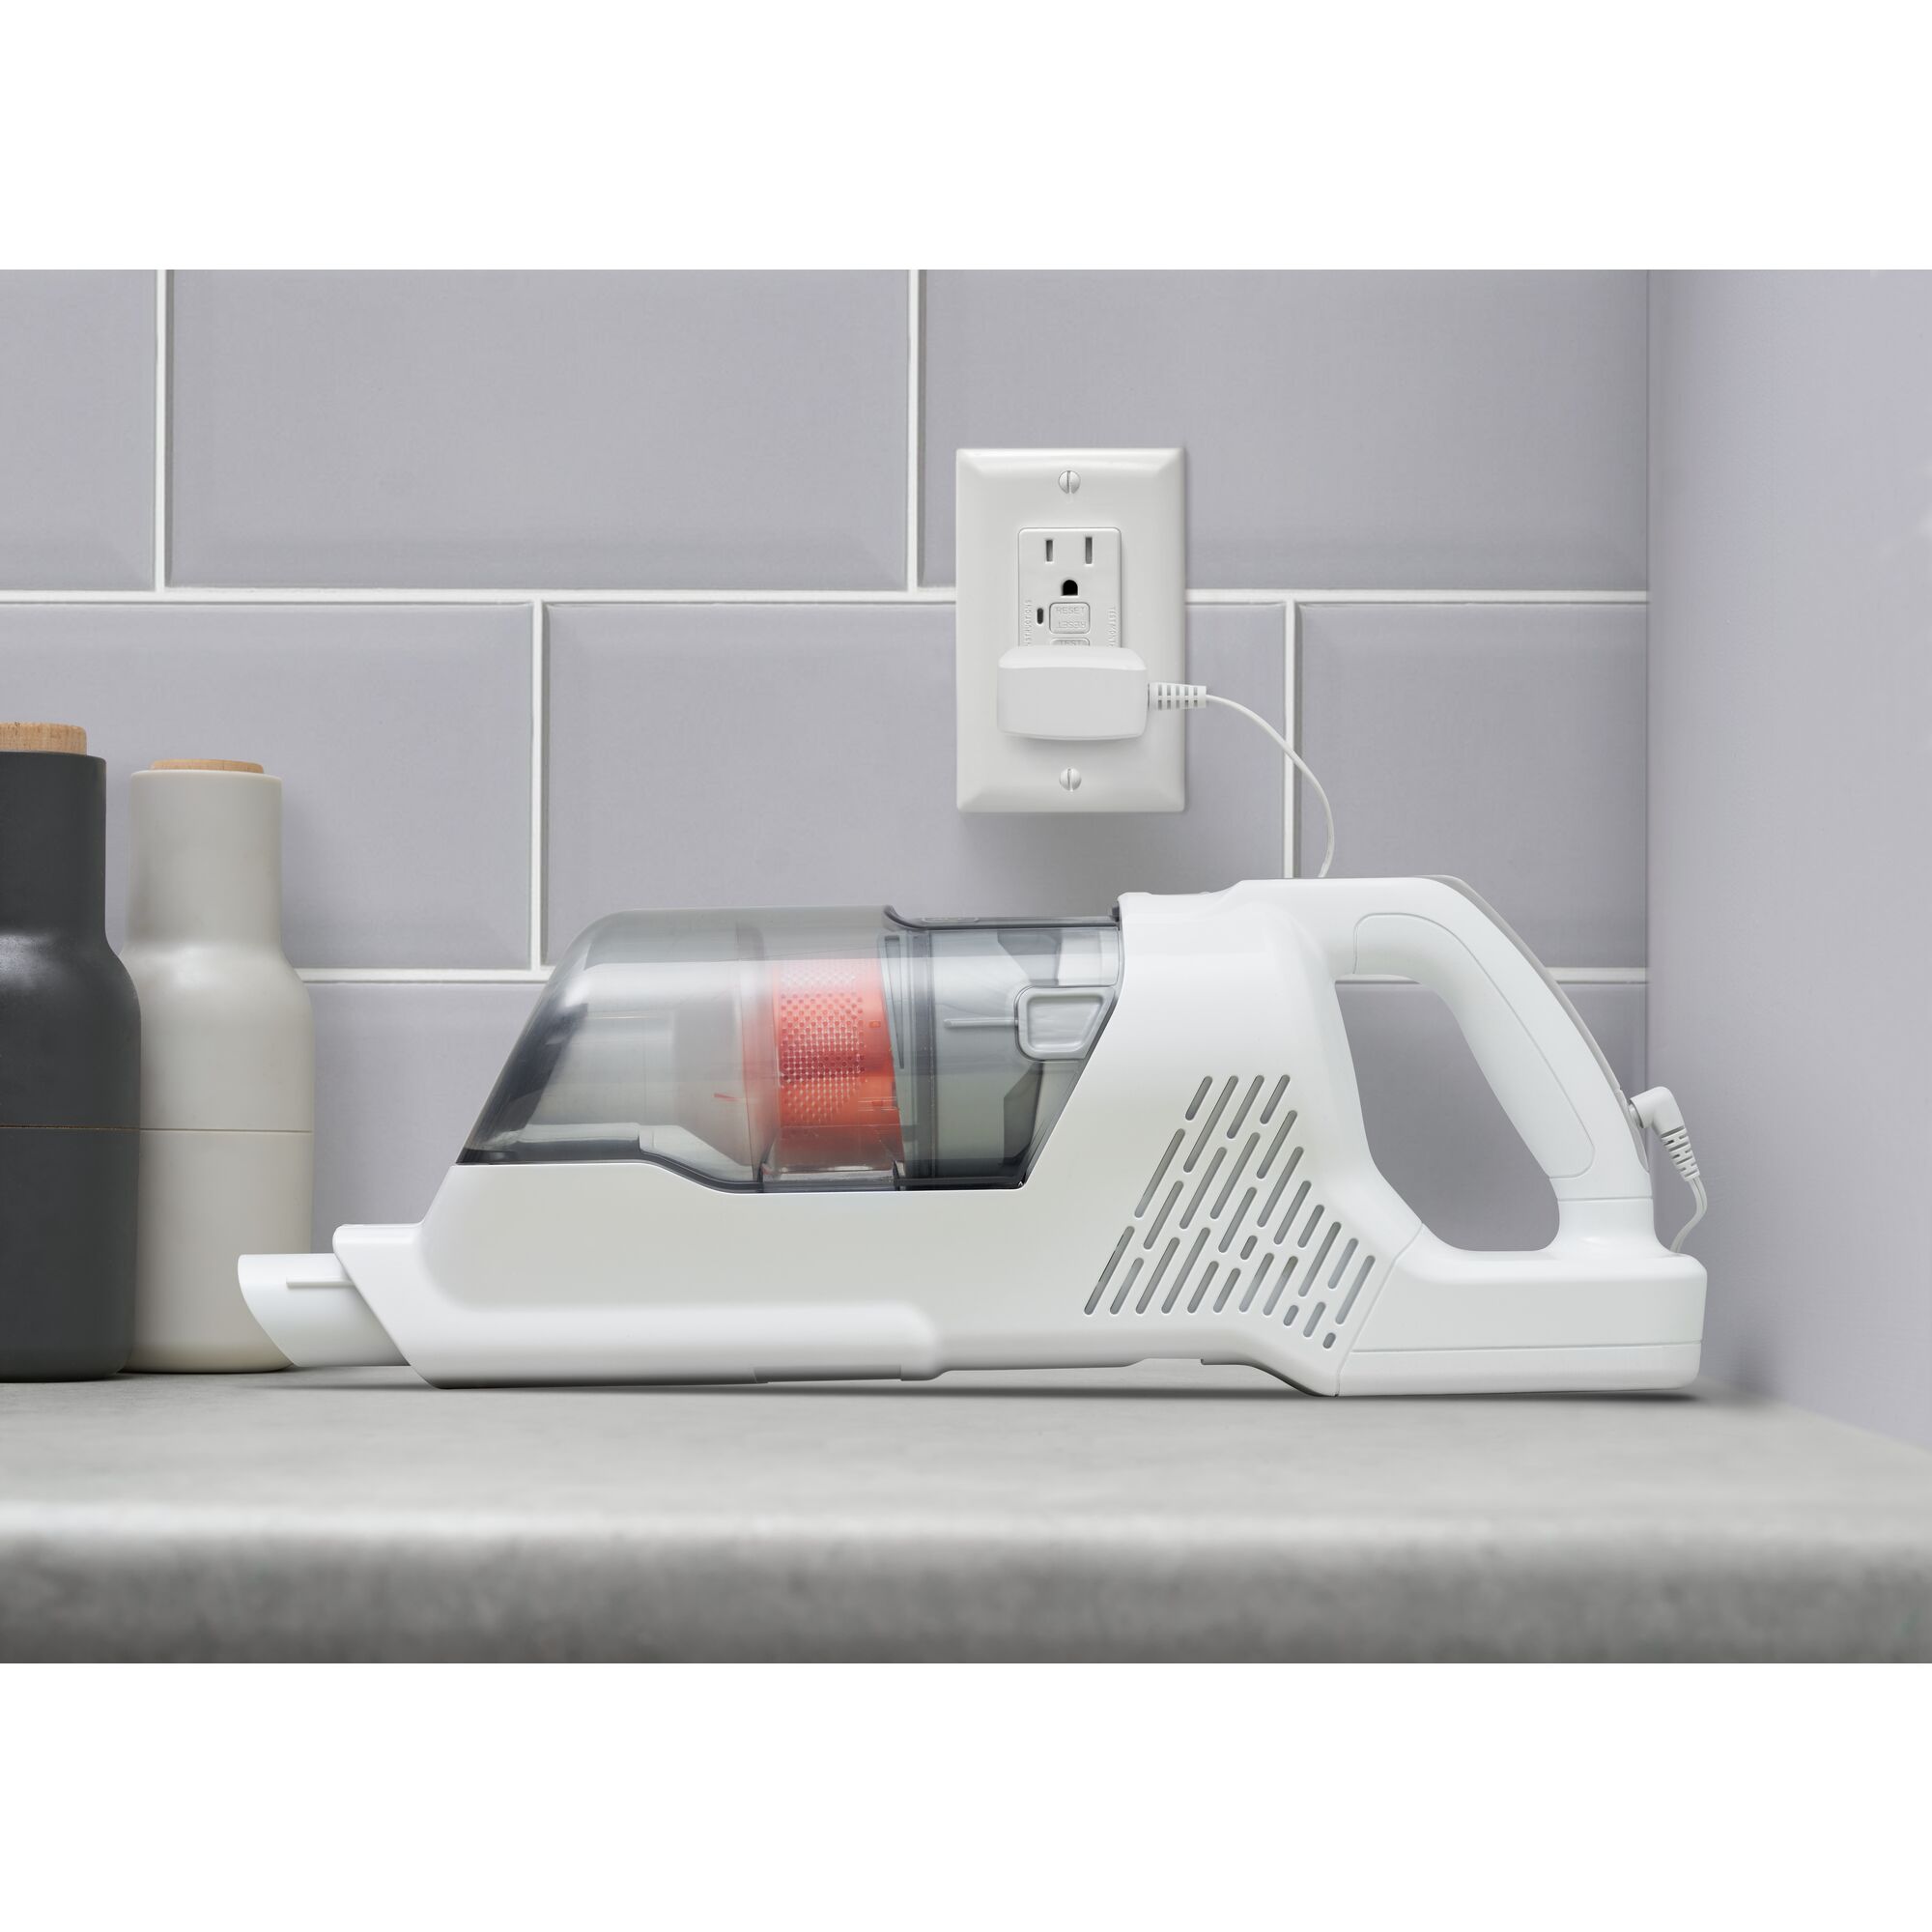 Handheld portion of Black and decker power series plus cordless stick vacuum plugged into charger on a countertop.